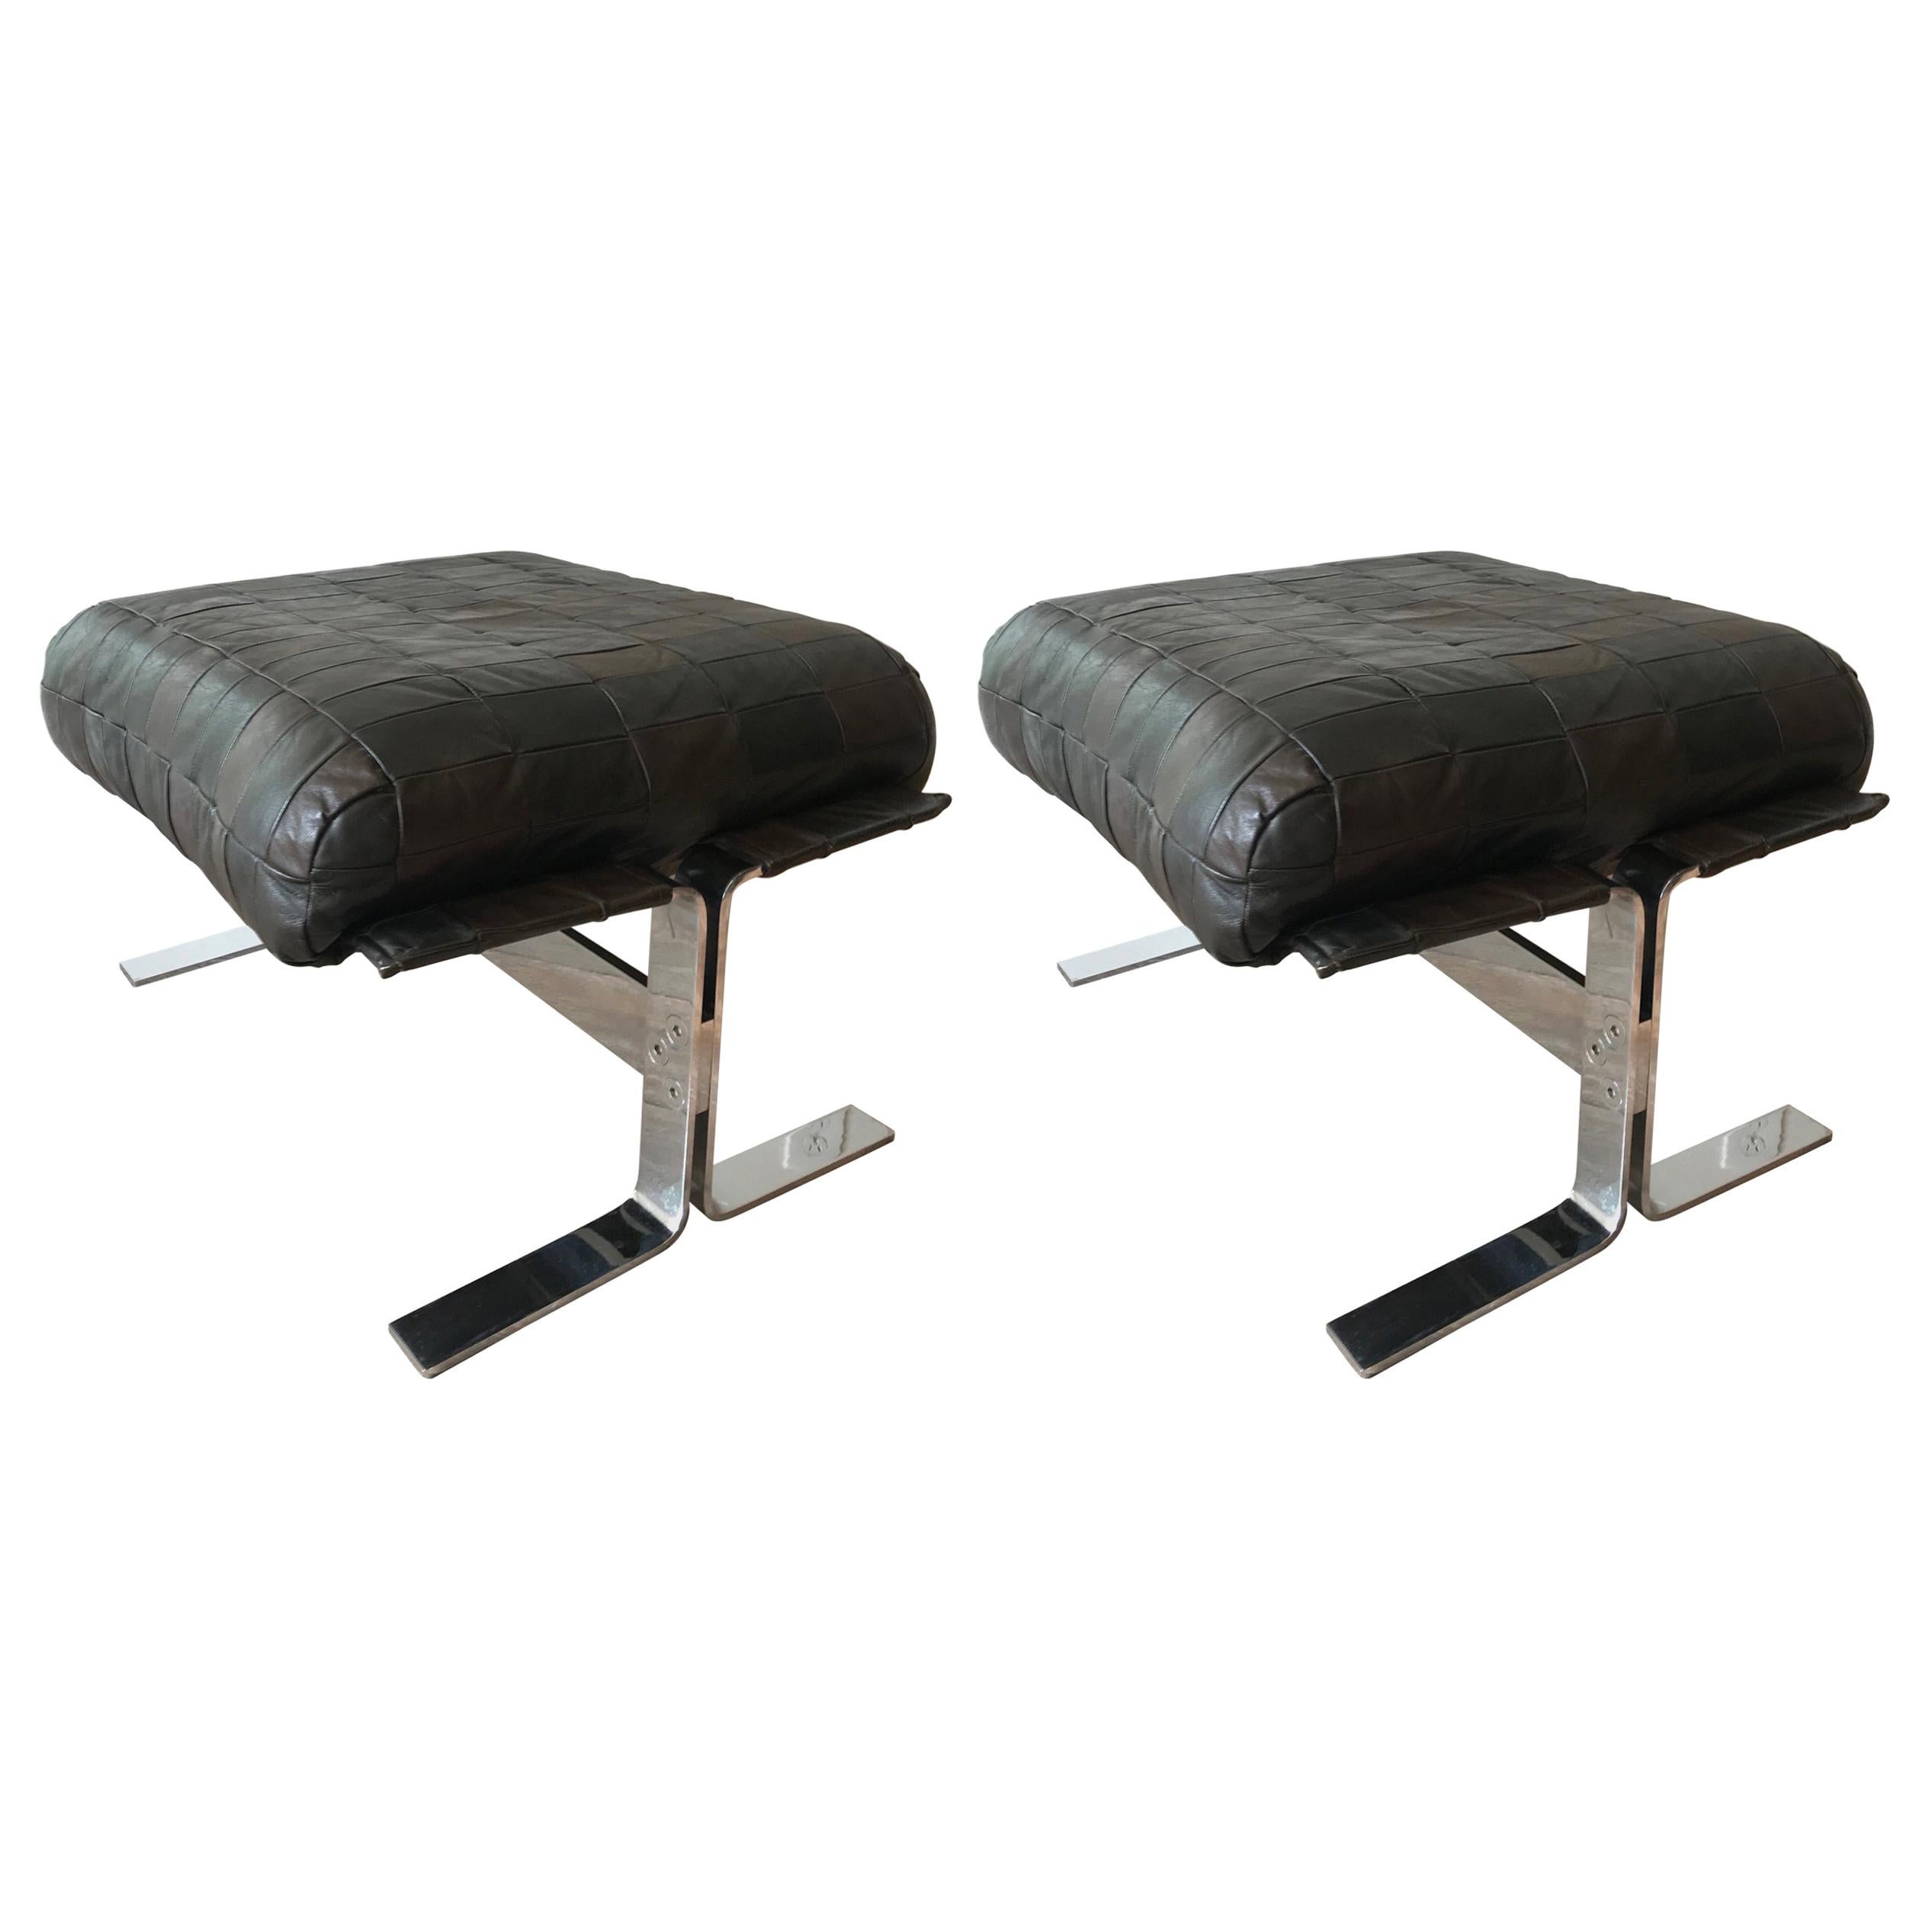 Pair of Chrome and Leather Ottomans by Kipp Stewart for Pace